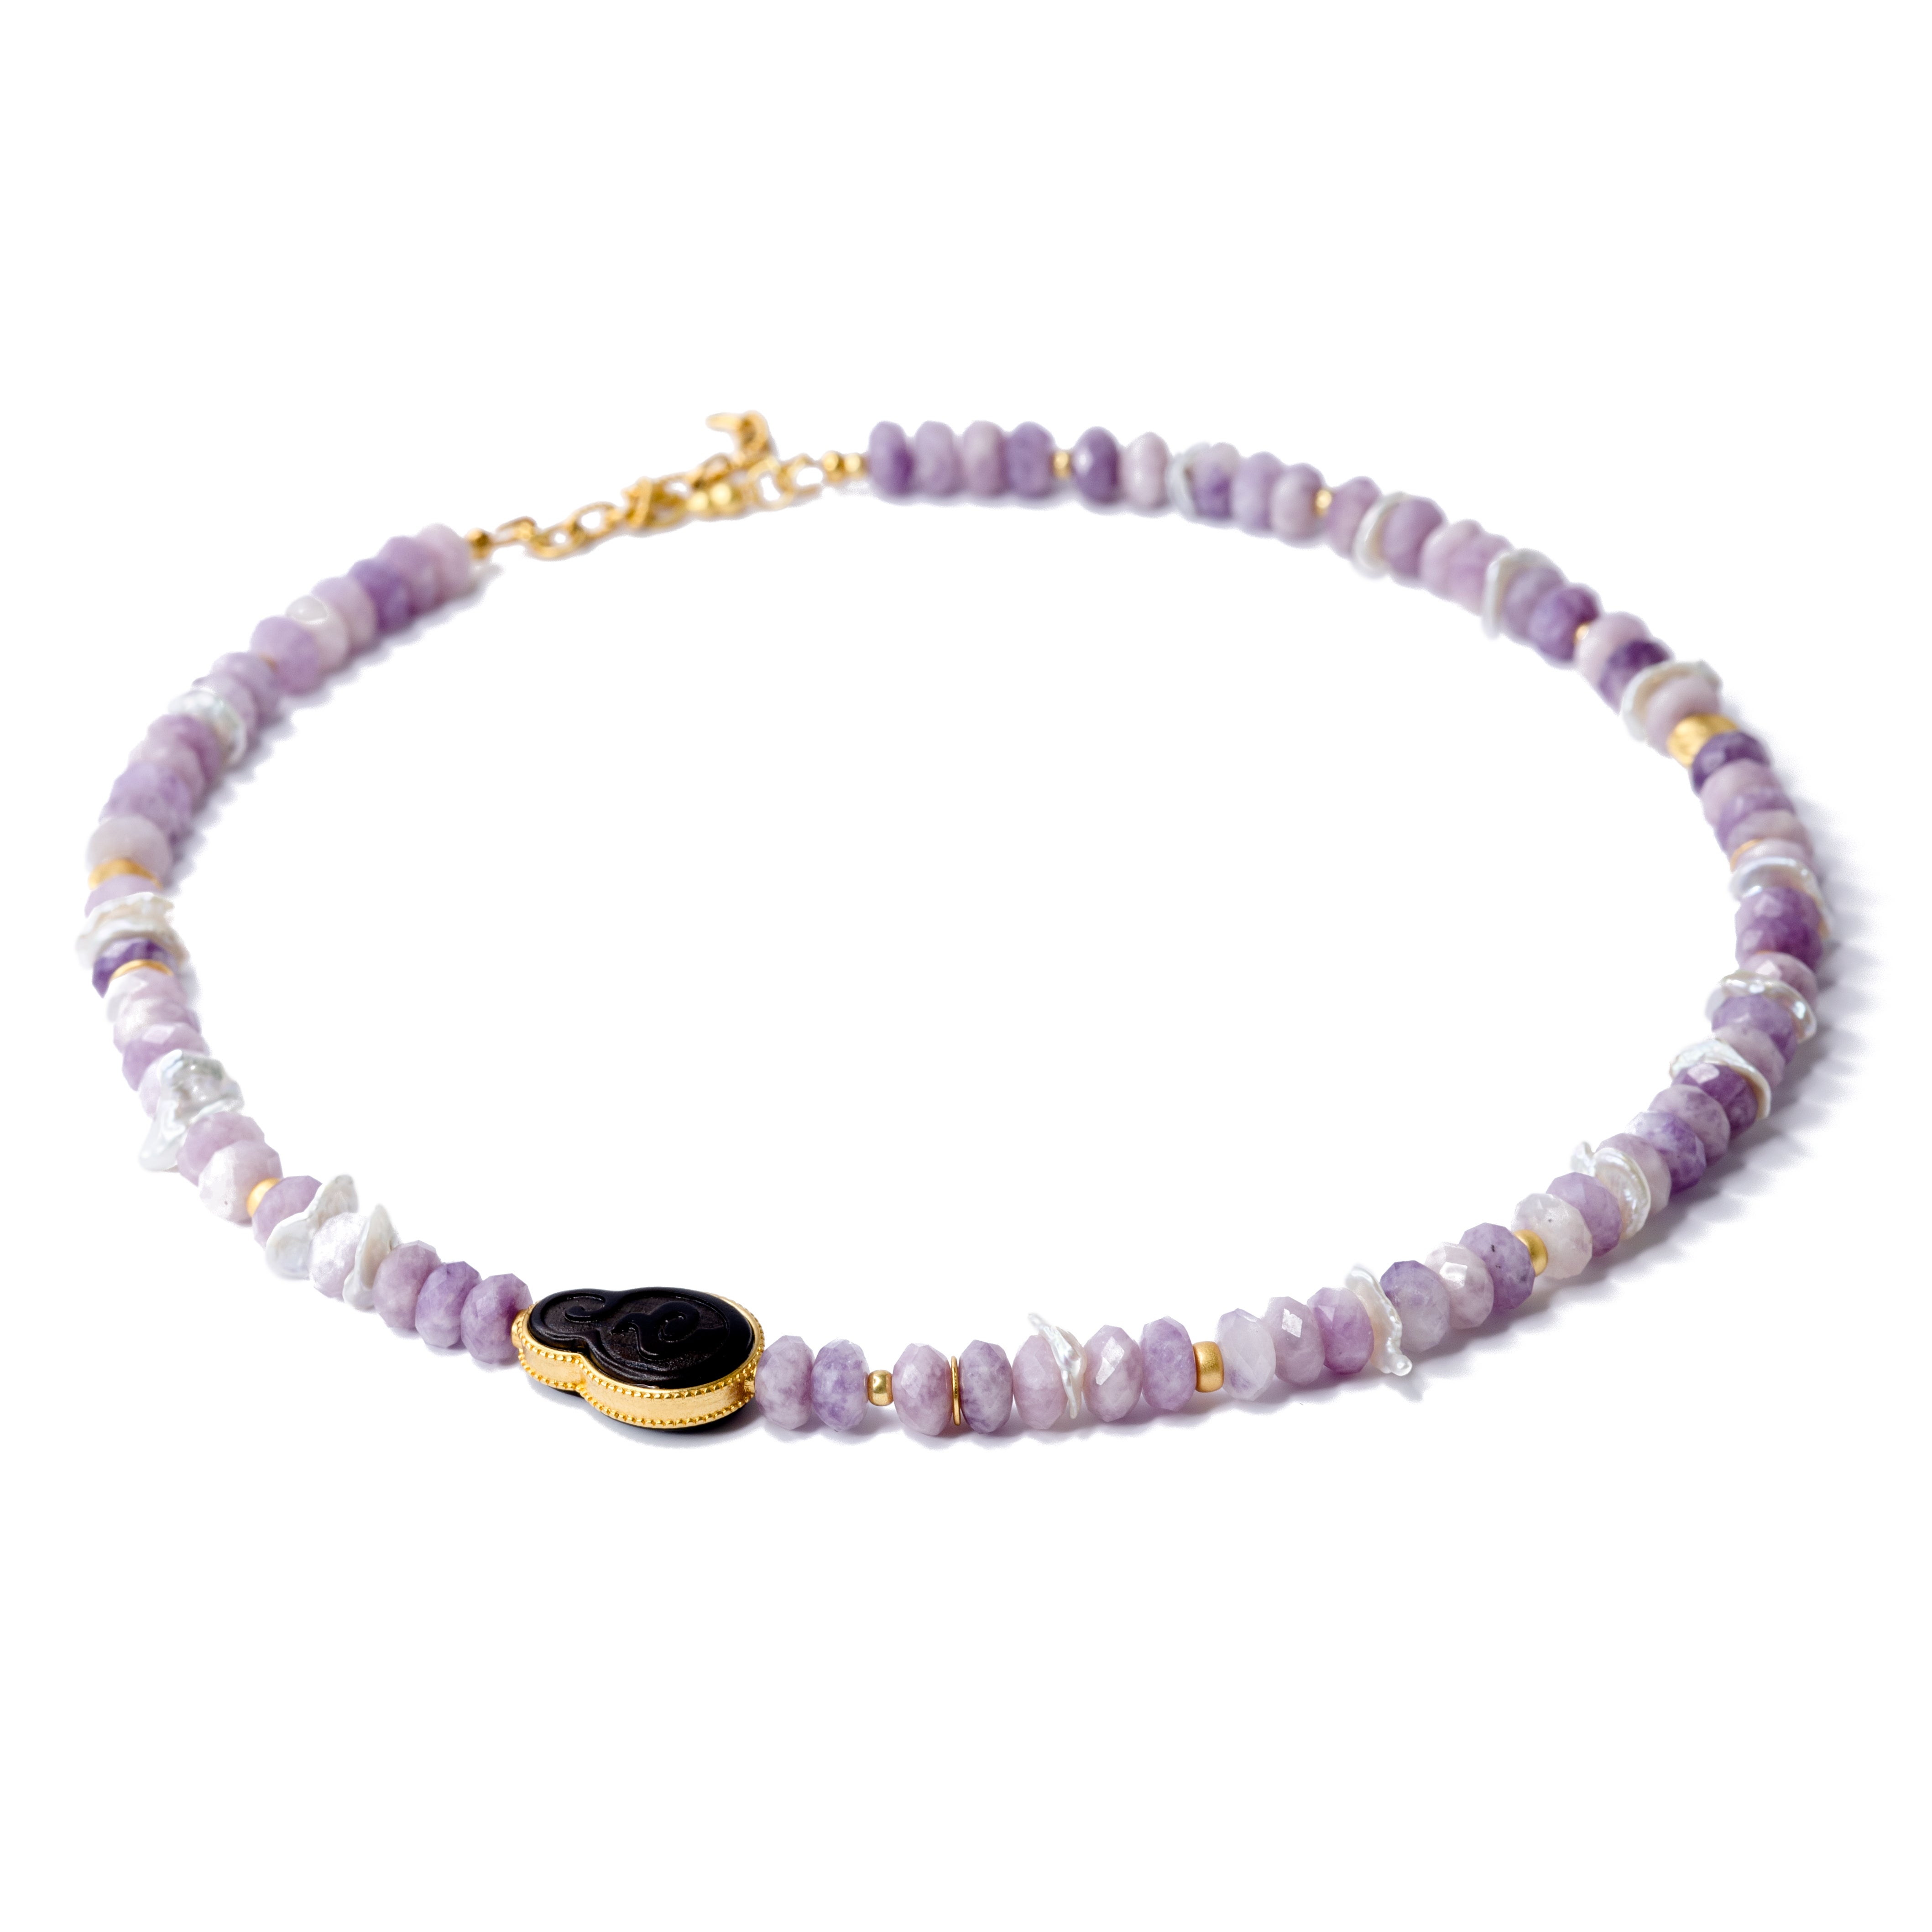 Lavender Kunzite Pearl Necklace - by Bombyx House